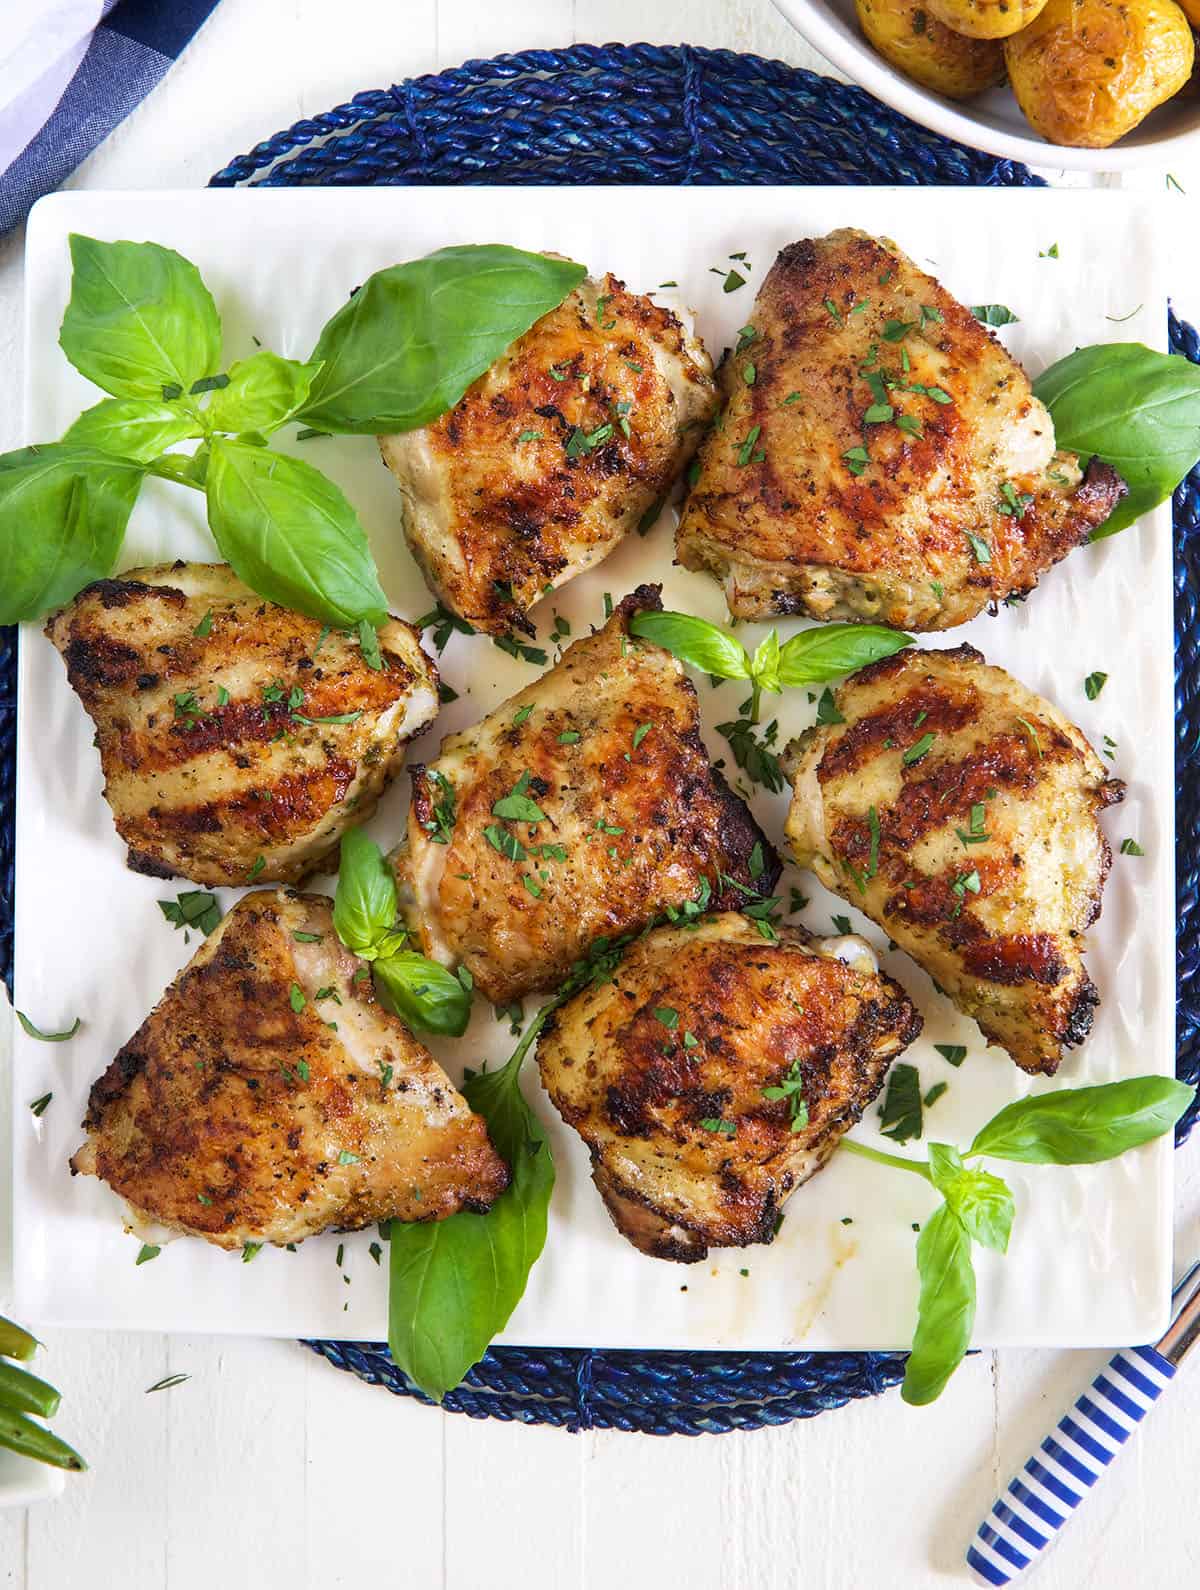 Several grilled chicken thighs are plated on a square white plate.